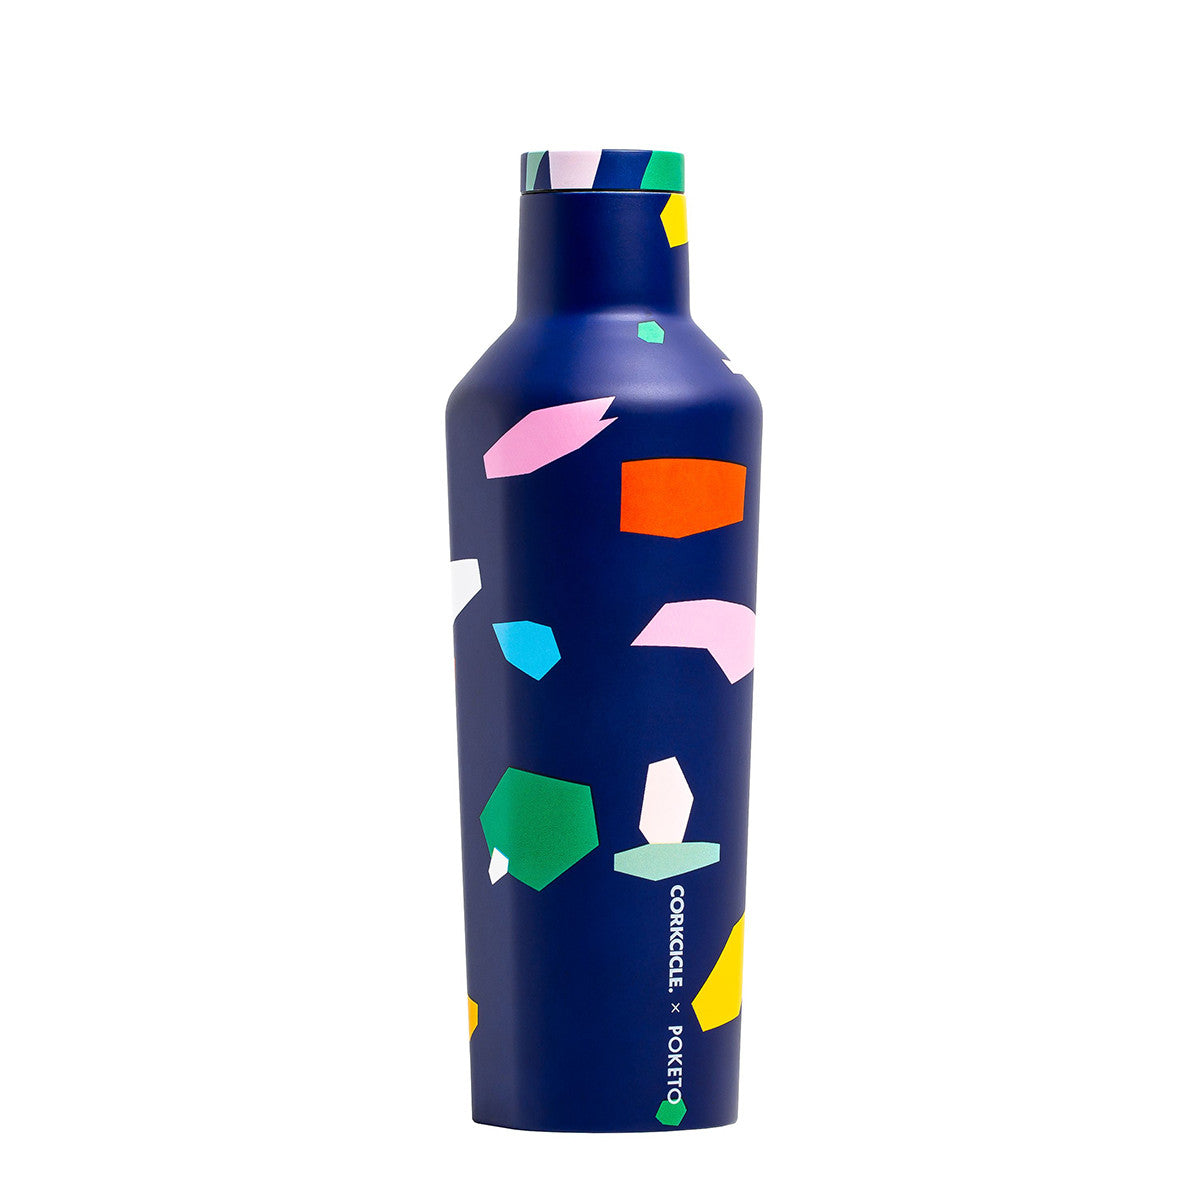 Corkcicle Poketo Canteen 475ml - Confetti Insulated Stainless Steel Drink Bottle